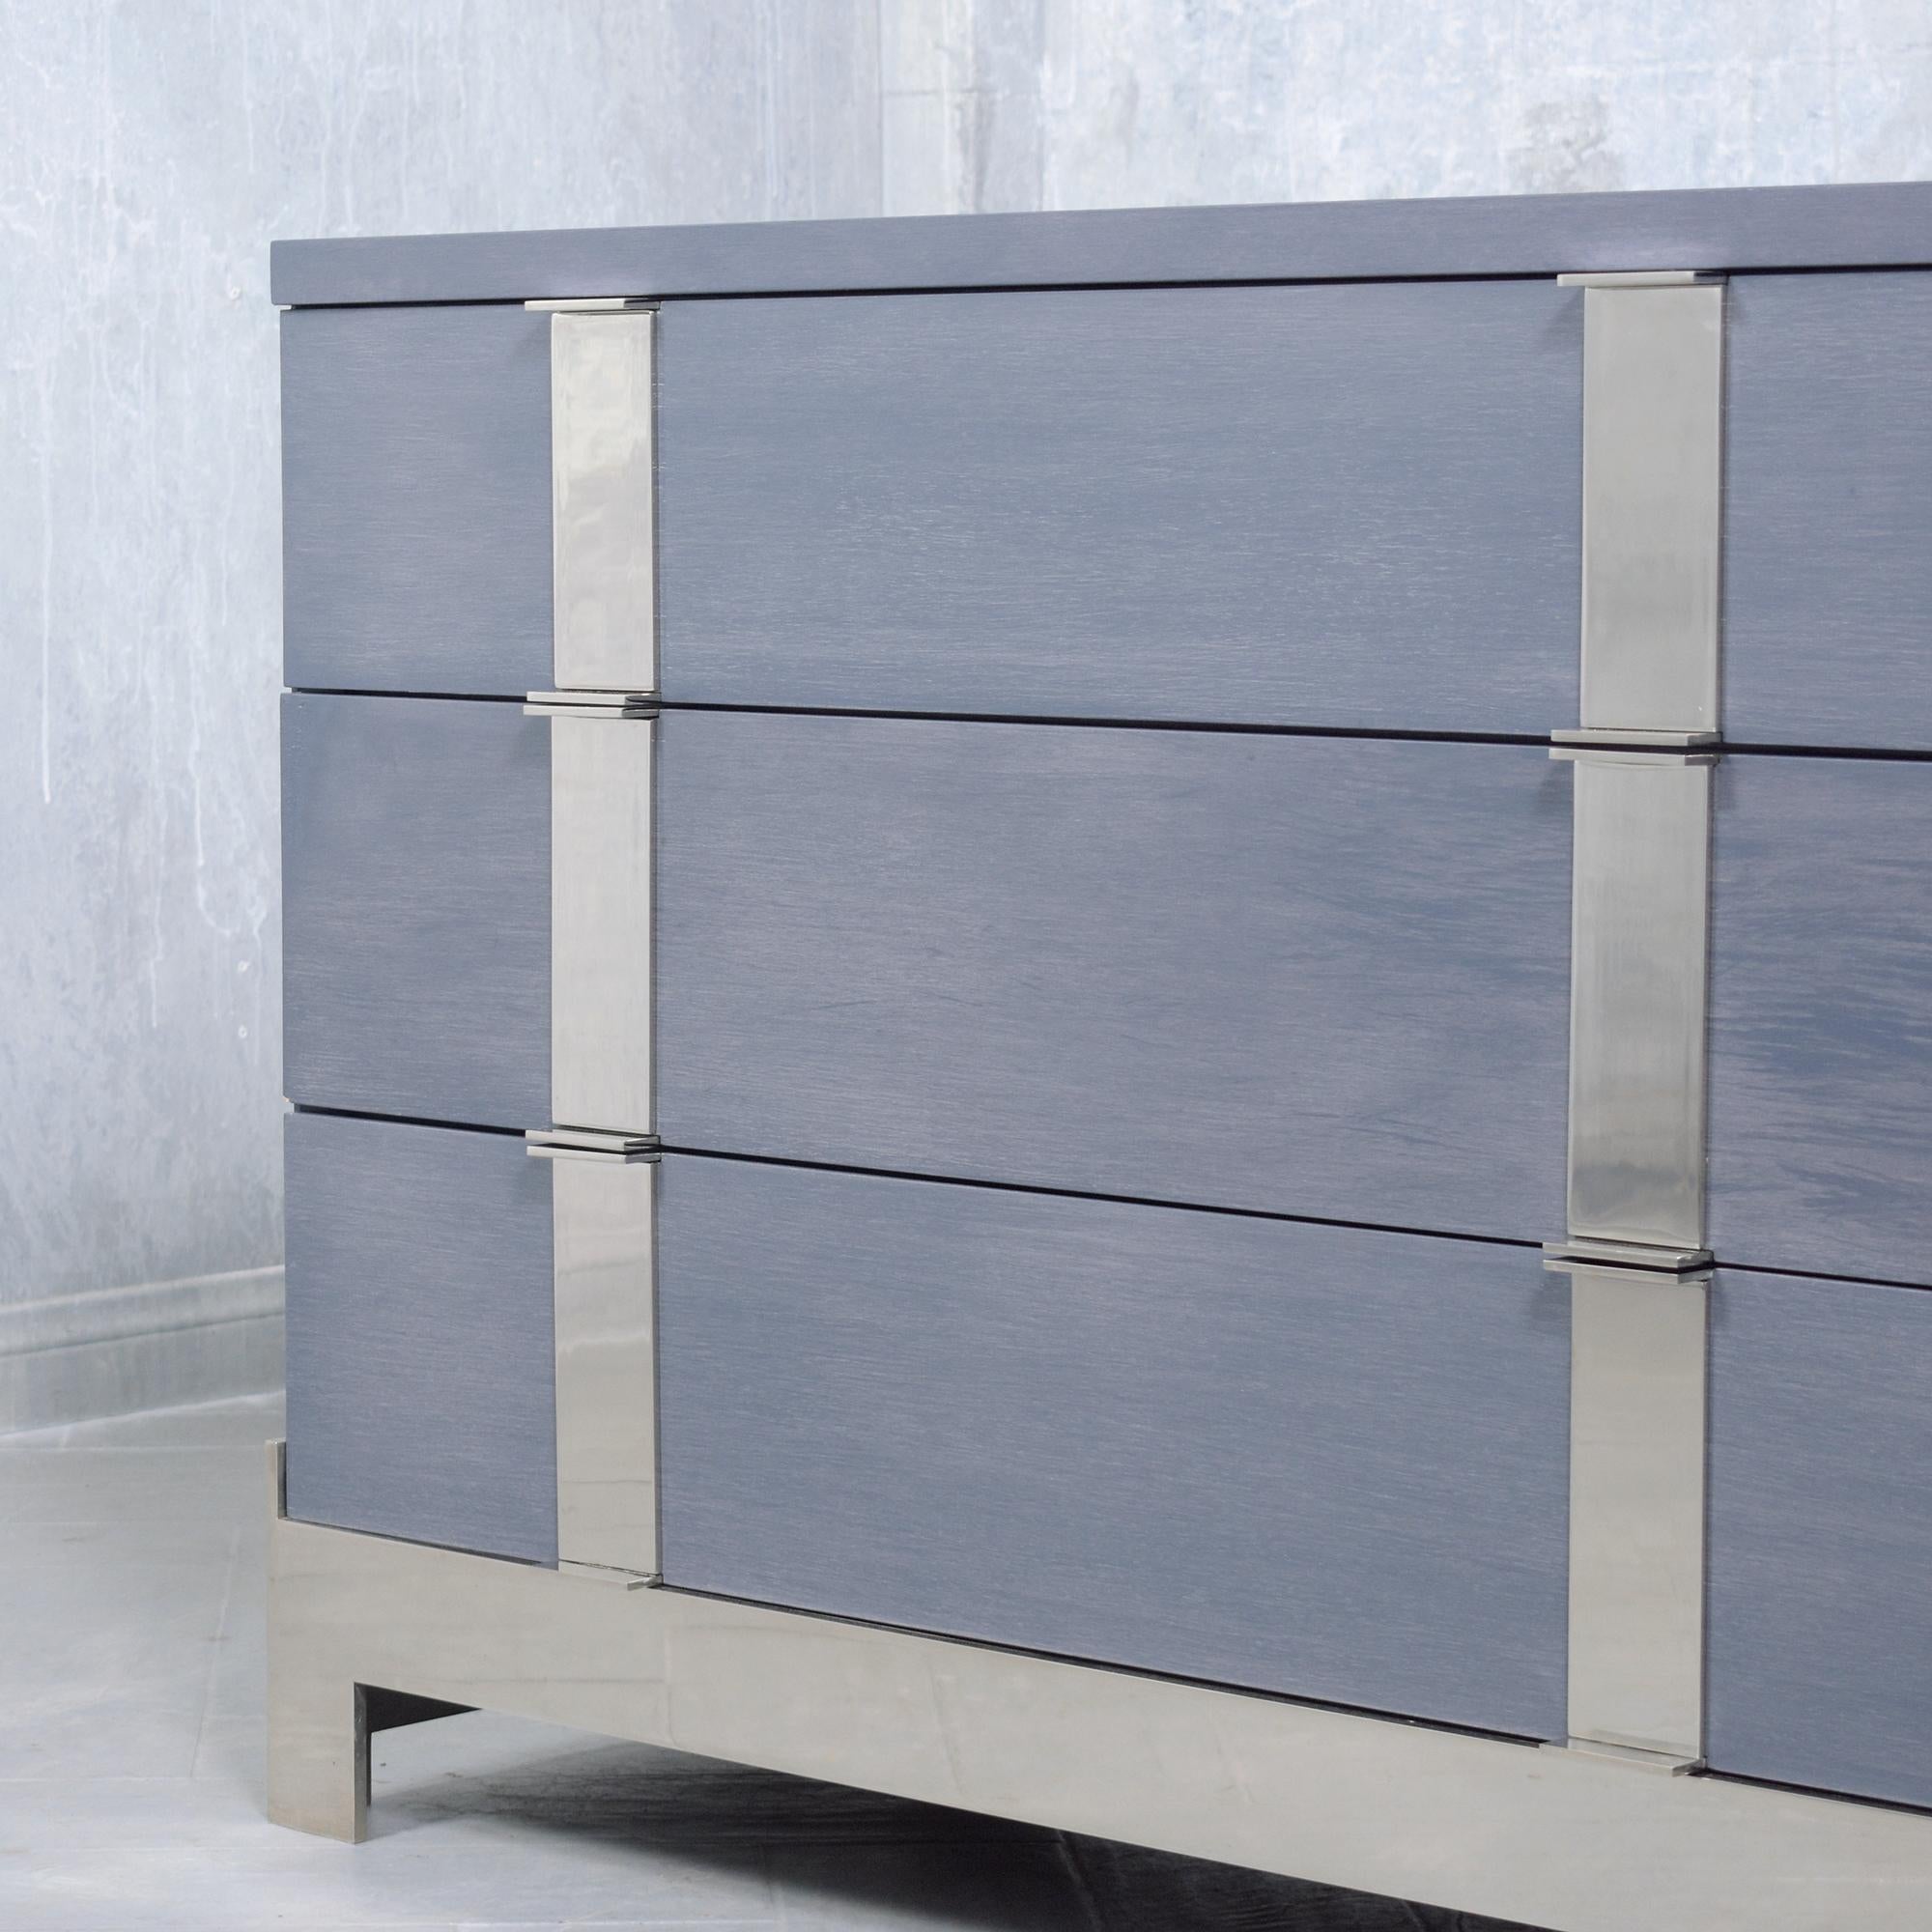 Elegant 1980s Joseph Jeup Chests: A Blend of Style and Storage For Sale 3